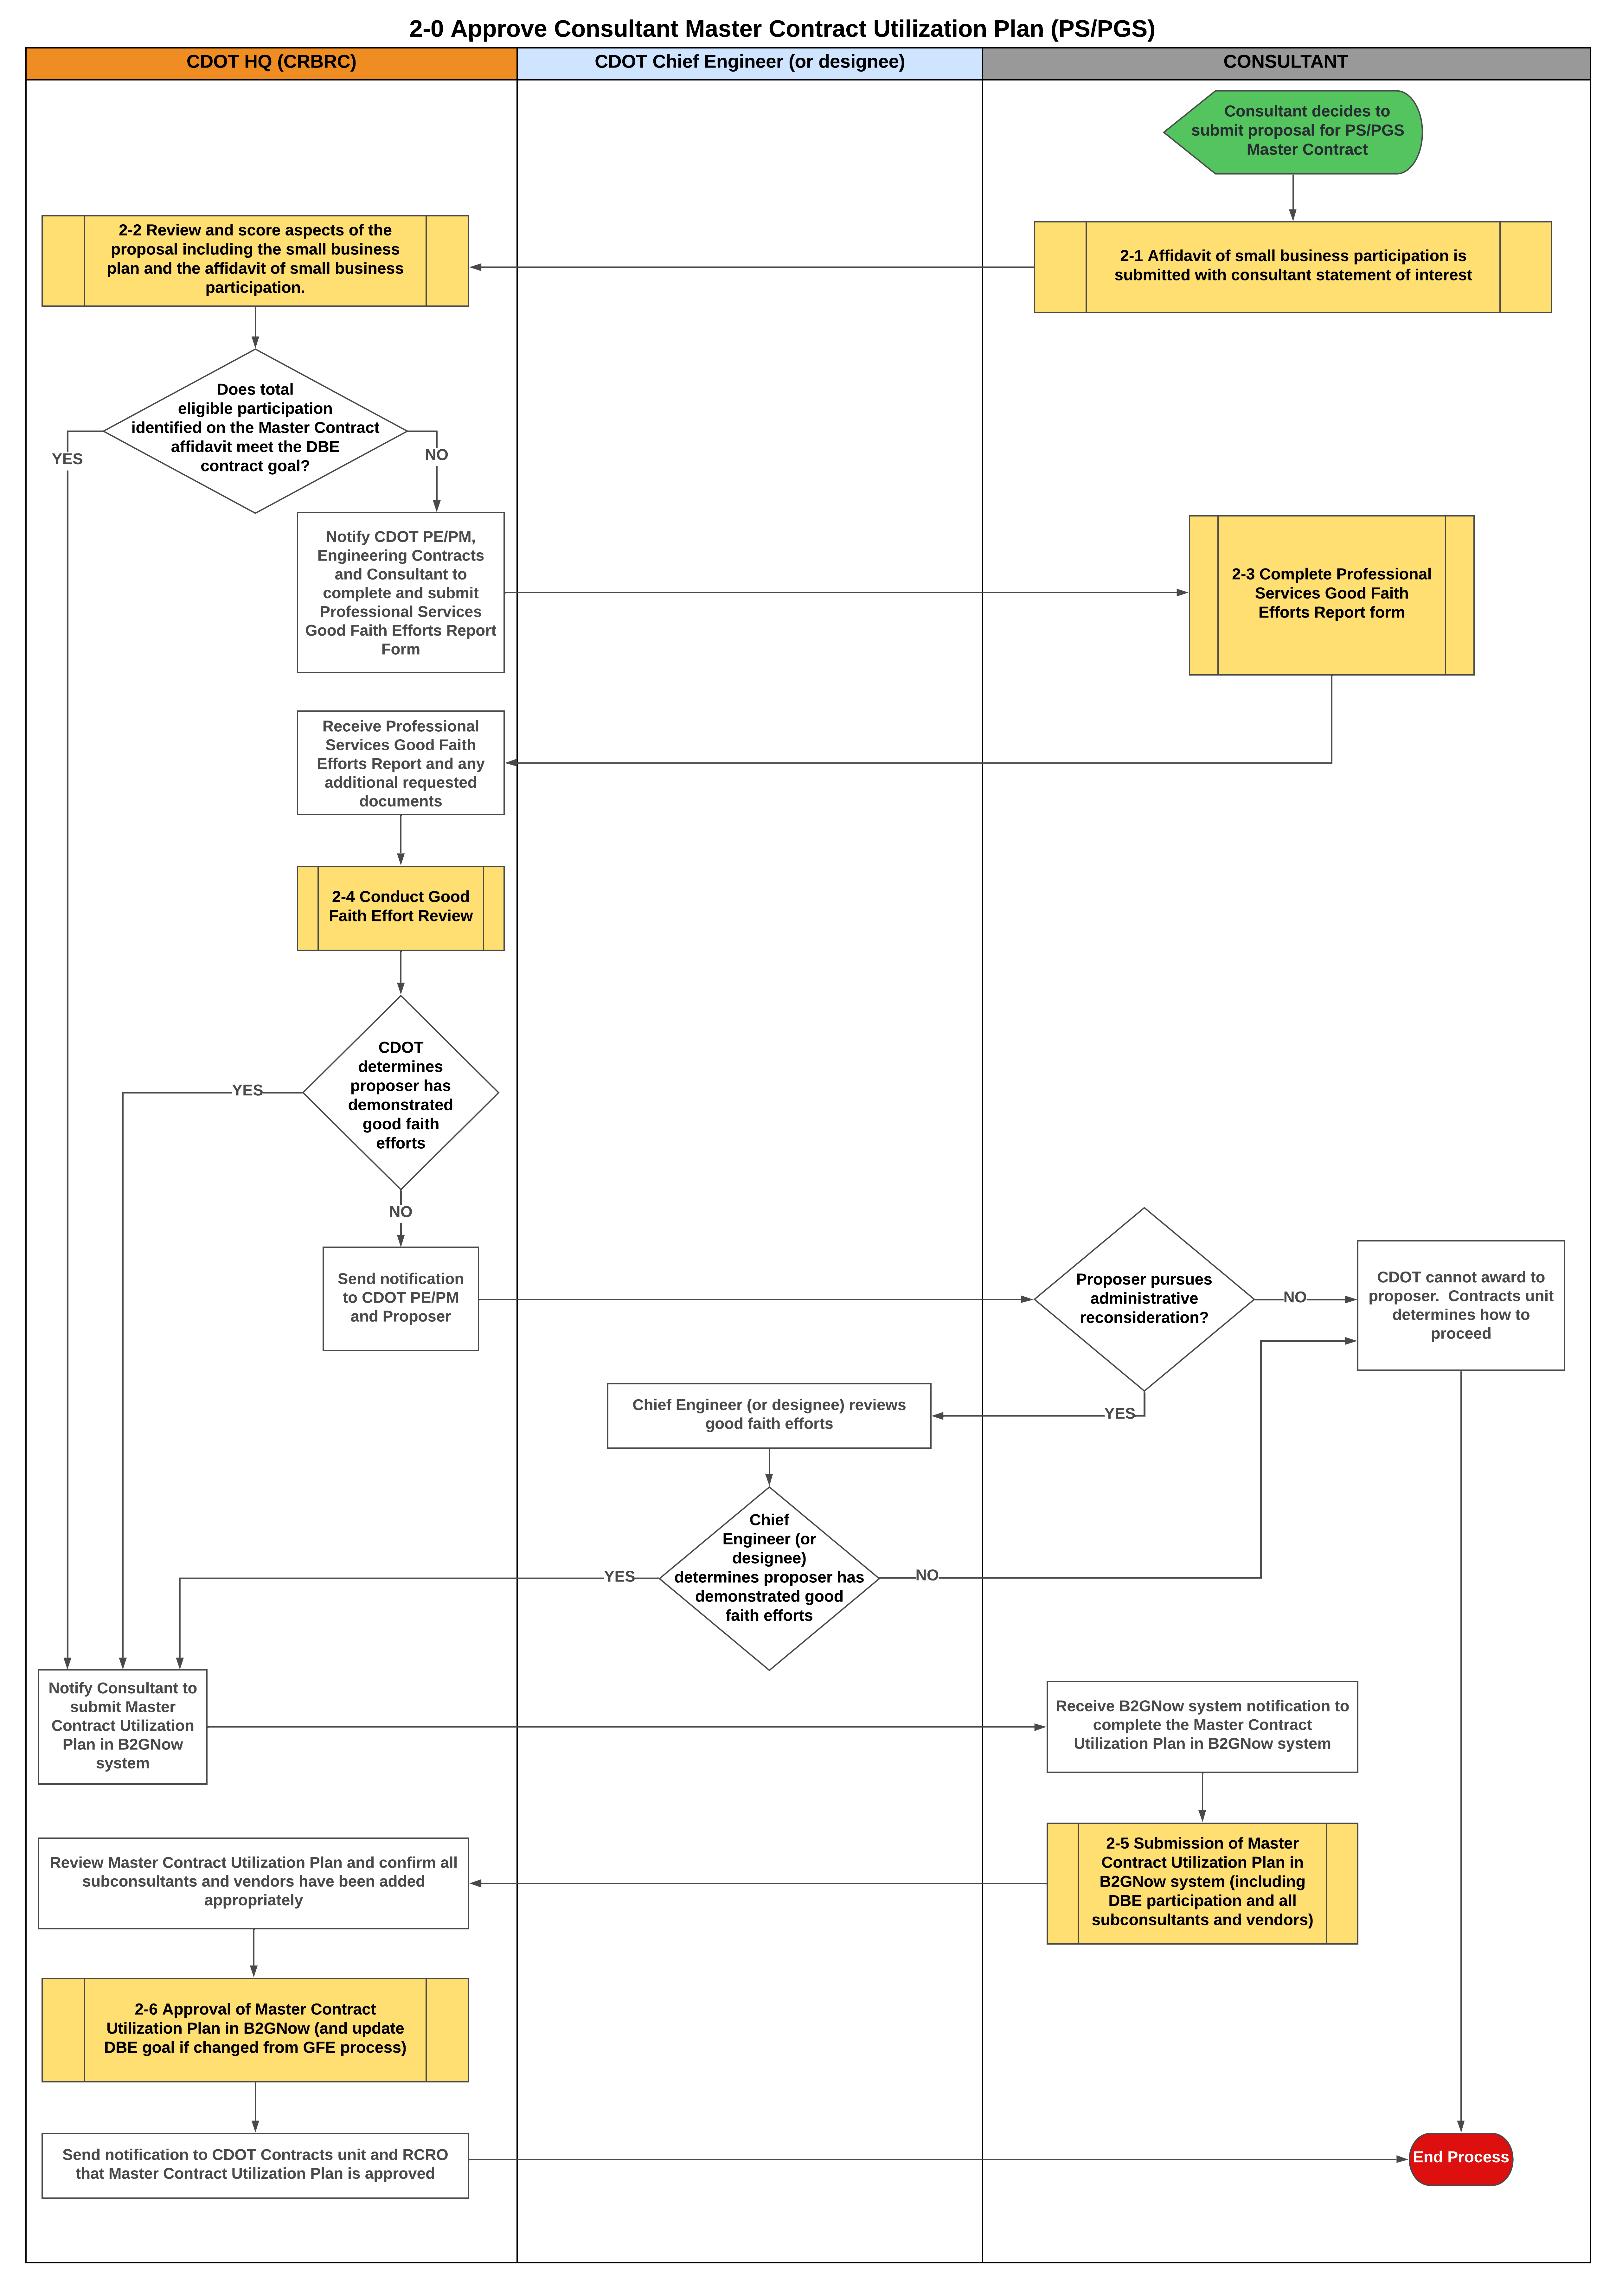 2-0 Approve Consultant Master Contract Utilization Plan (PS_PGS).png detail image